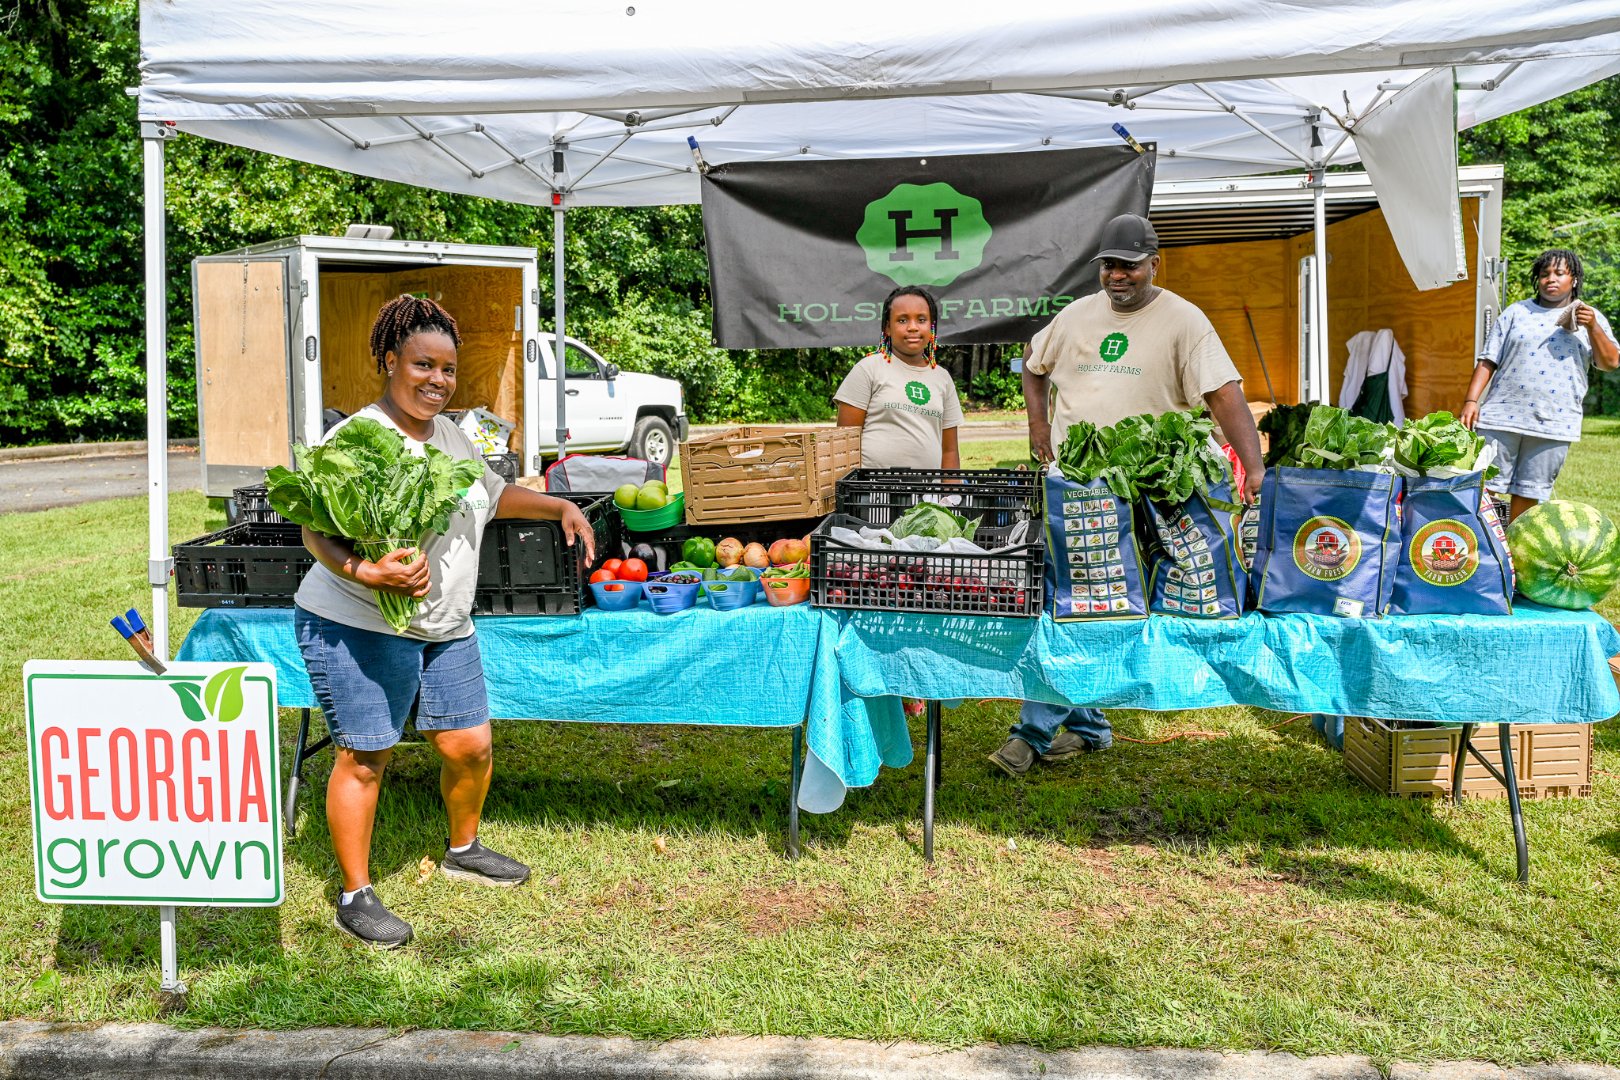 Fort Valley State University student Rodney “RJ” Brooks worked with Shon and Chiquita Holsey of Holsey Farms over the summer at several farmers markets, including in Peach County.